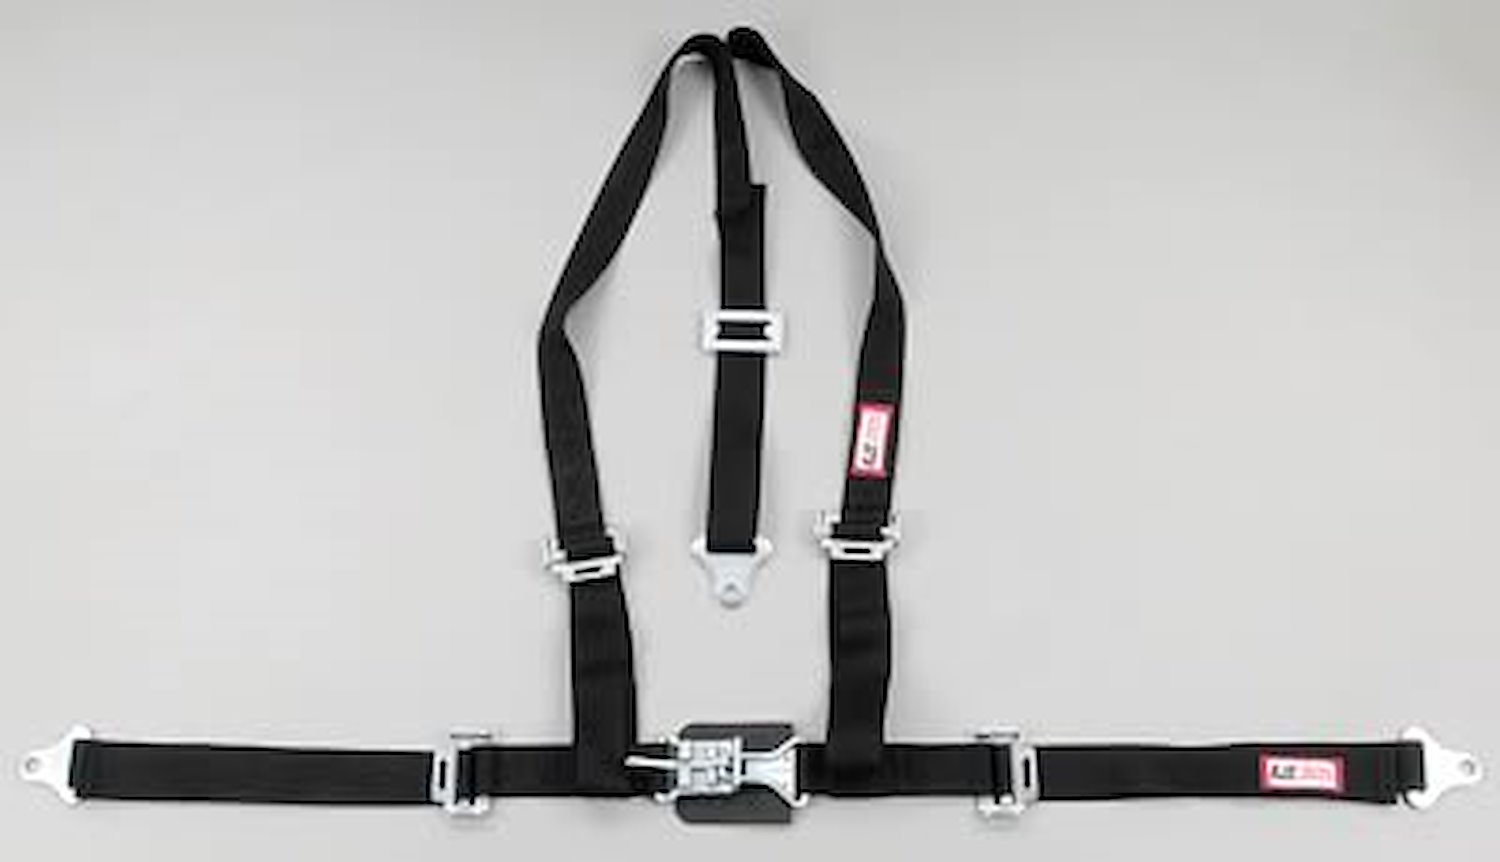 NON-SFI L&L HARNESS 2 PULL UP Lap Belt SEWN IN 2 S.H. INDIVIDUAL FLOOR Mount w/STERNUM STRAP ALL WRAP ENDS BLACK